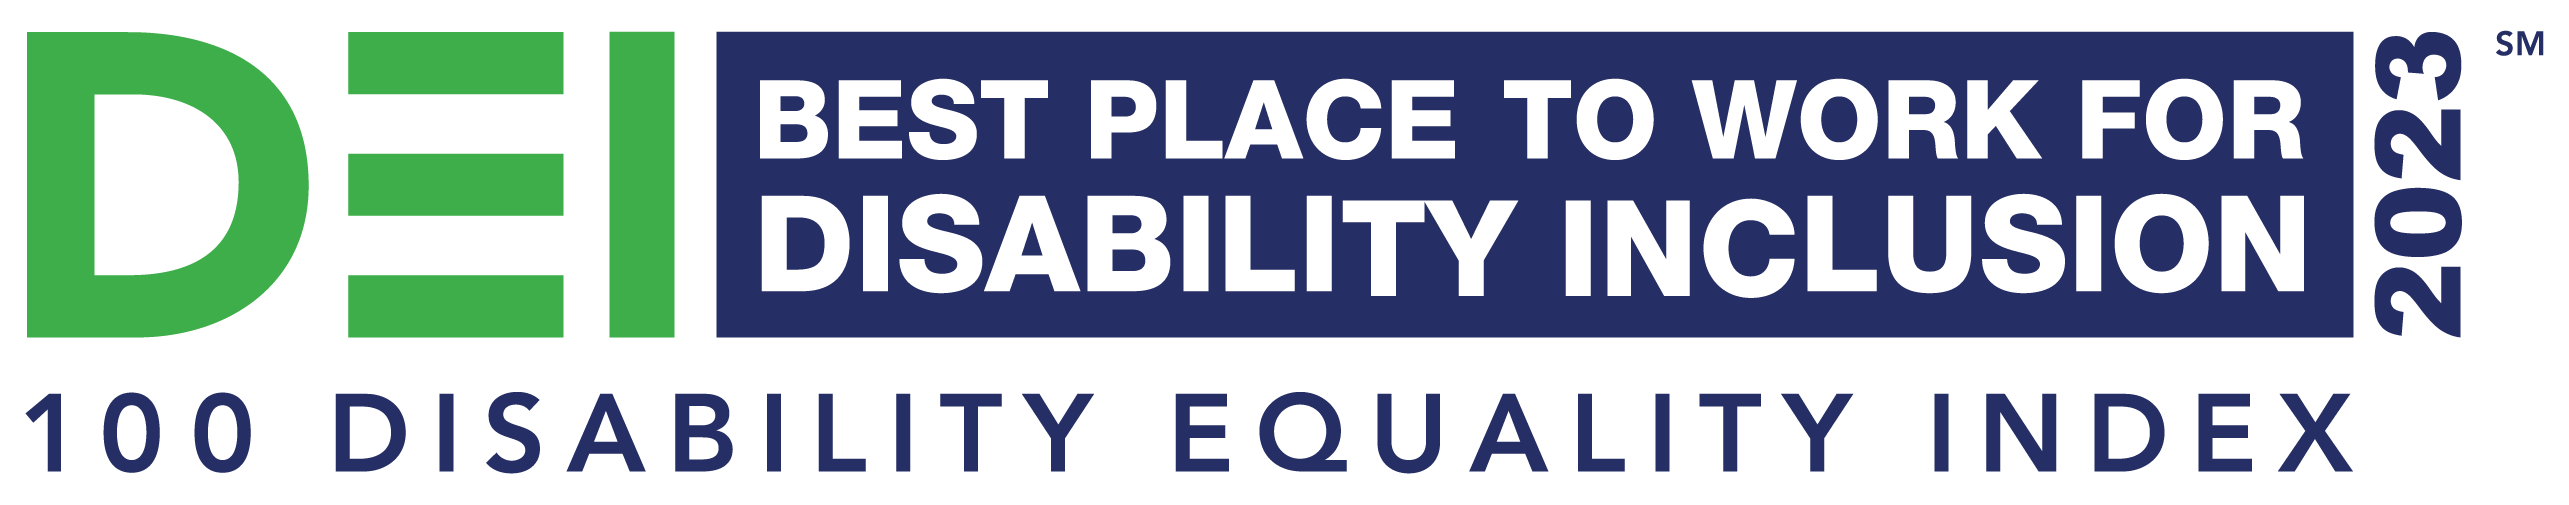 2023 Disability Equality Index - Best Place to Work for Disability Inclusion